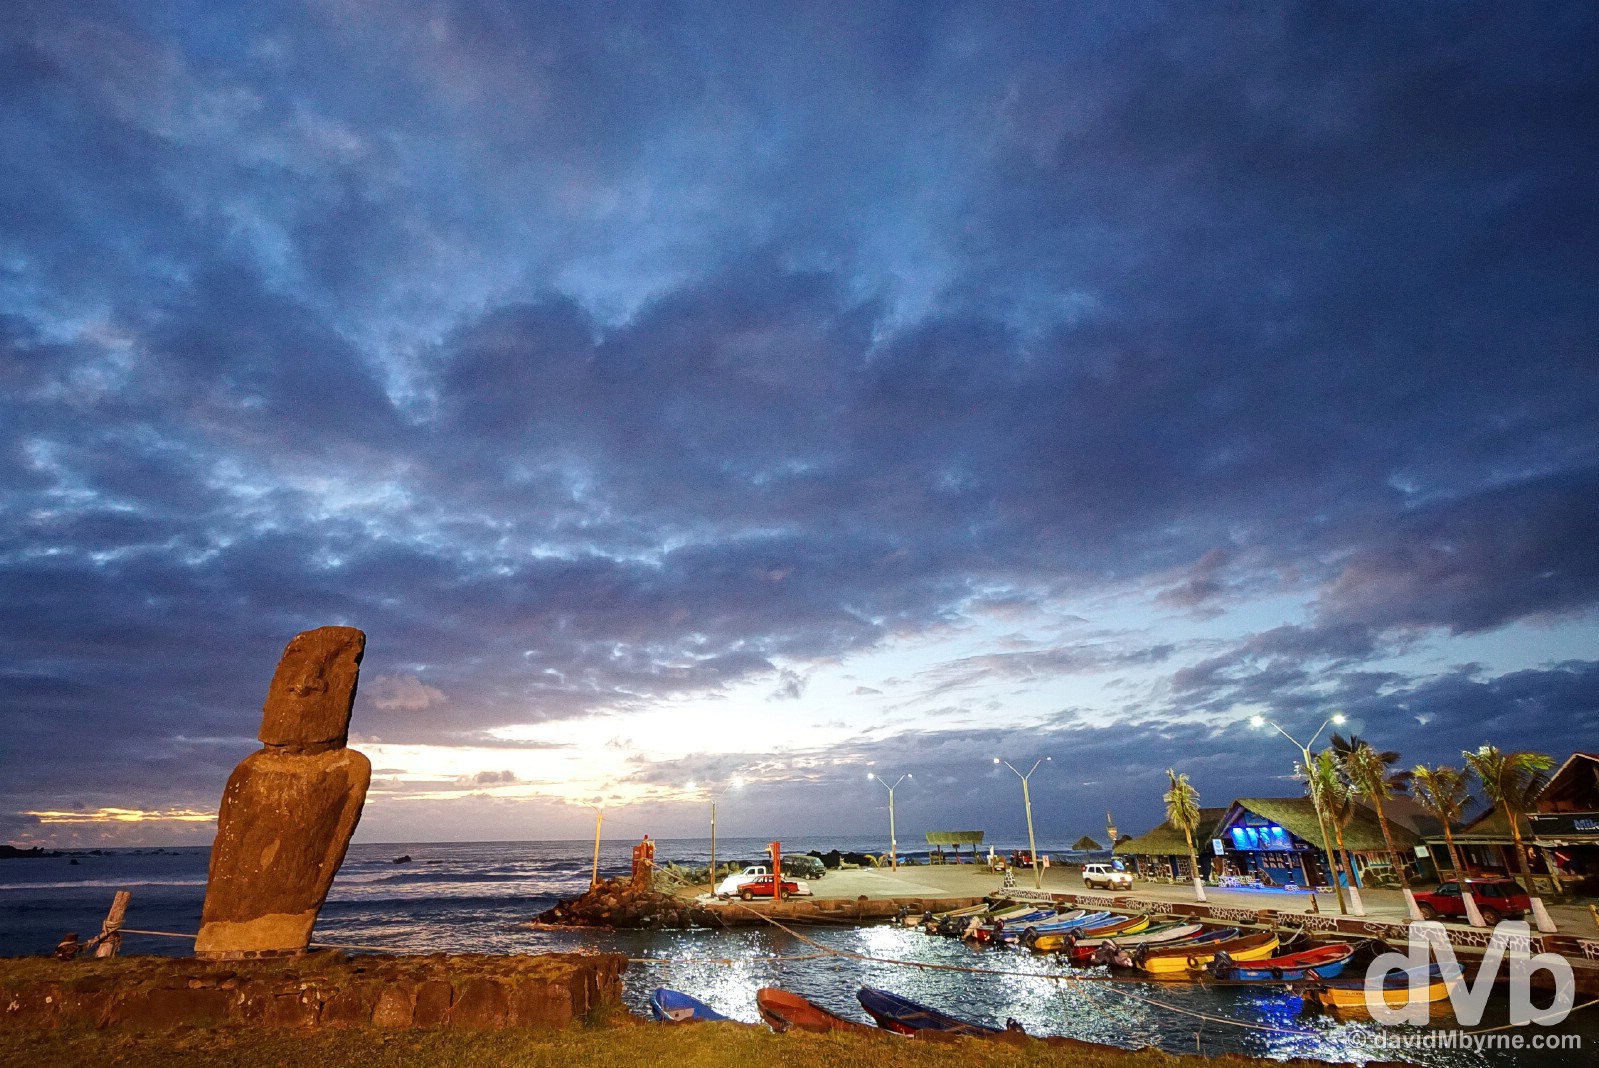 Dusk in overlooking the harbour in Hanga Roa, Easter Island, Chile. October 2, 2015.